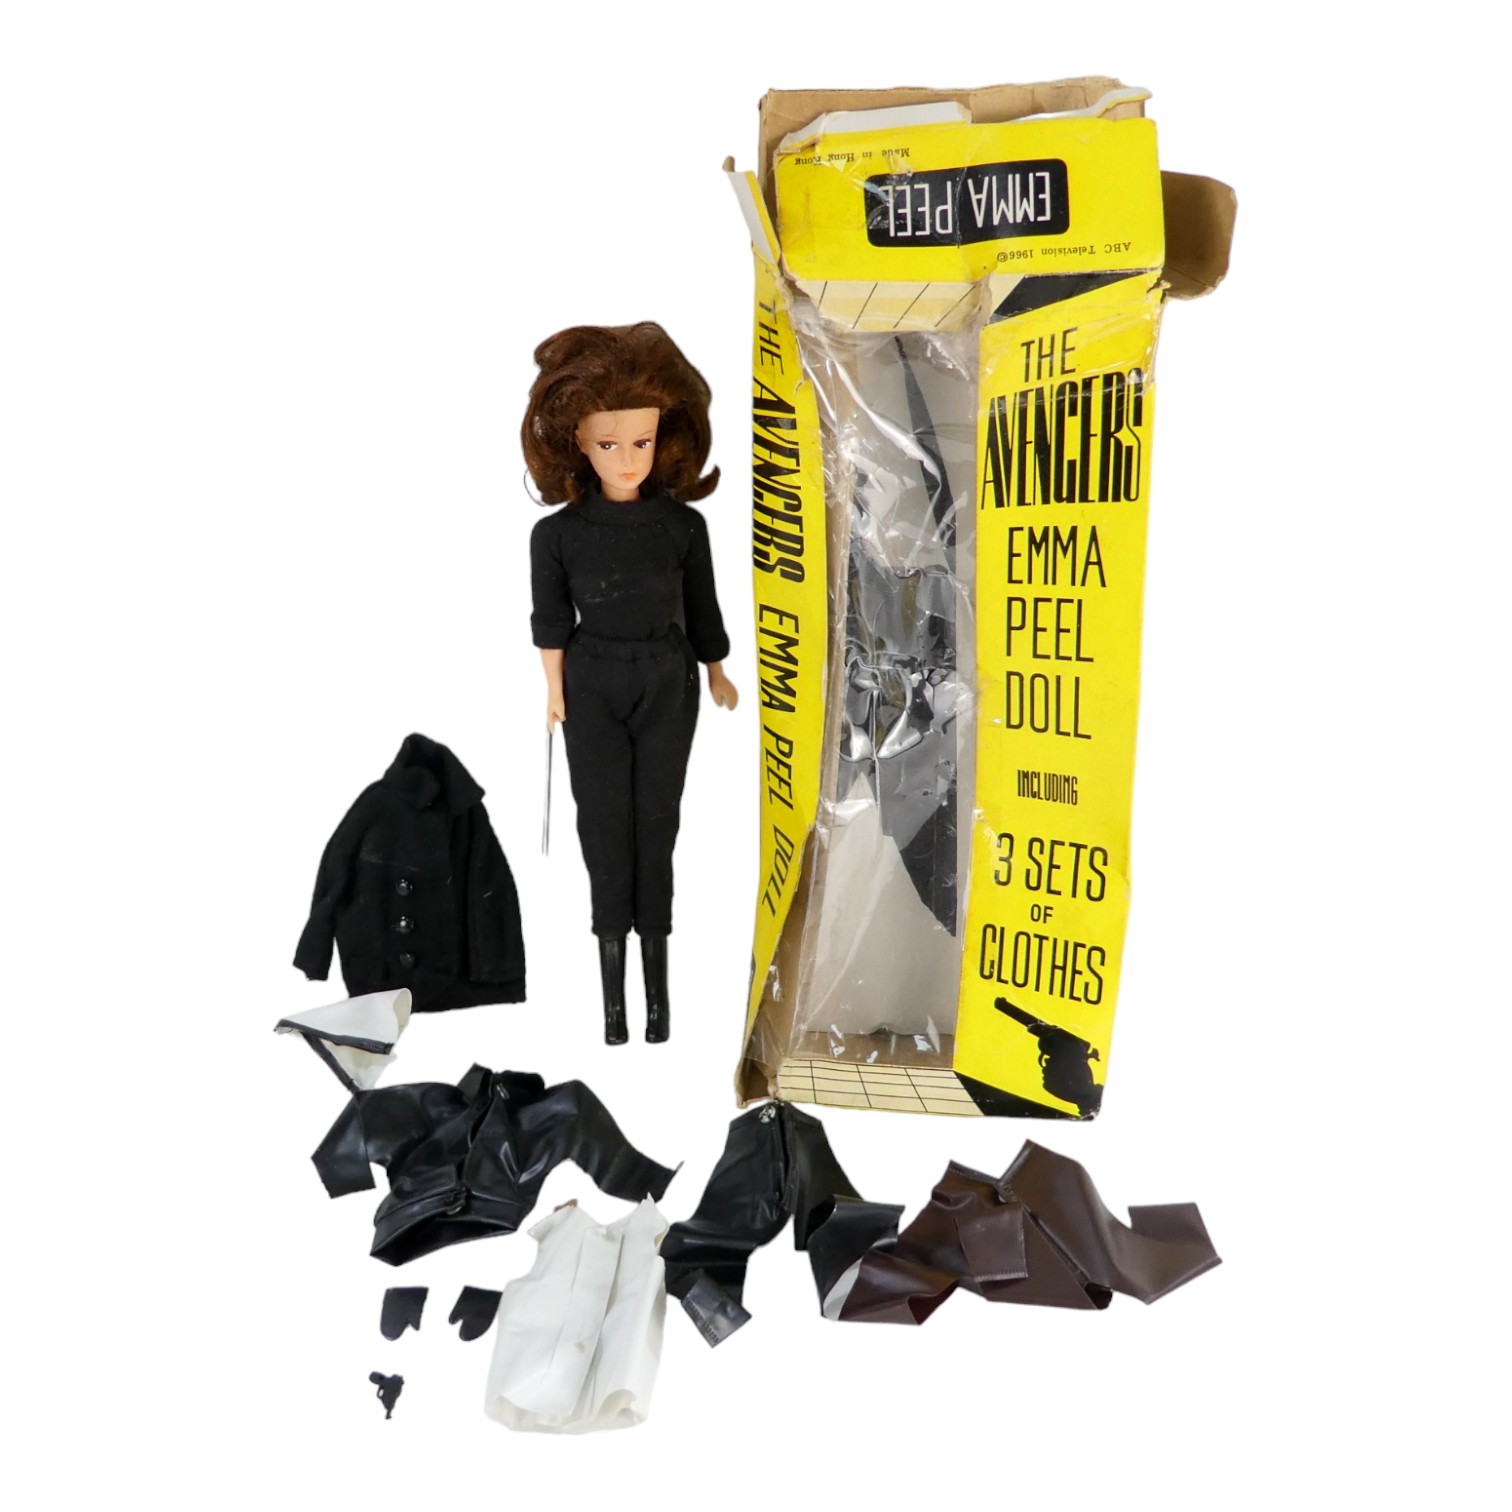 The Avengers Emma Peel vintage doll - possibly Fairylite 1966, wearing black roll neck sweater,